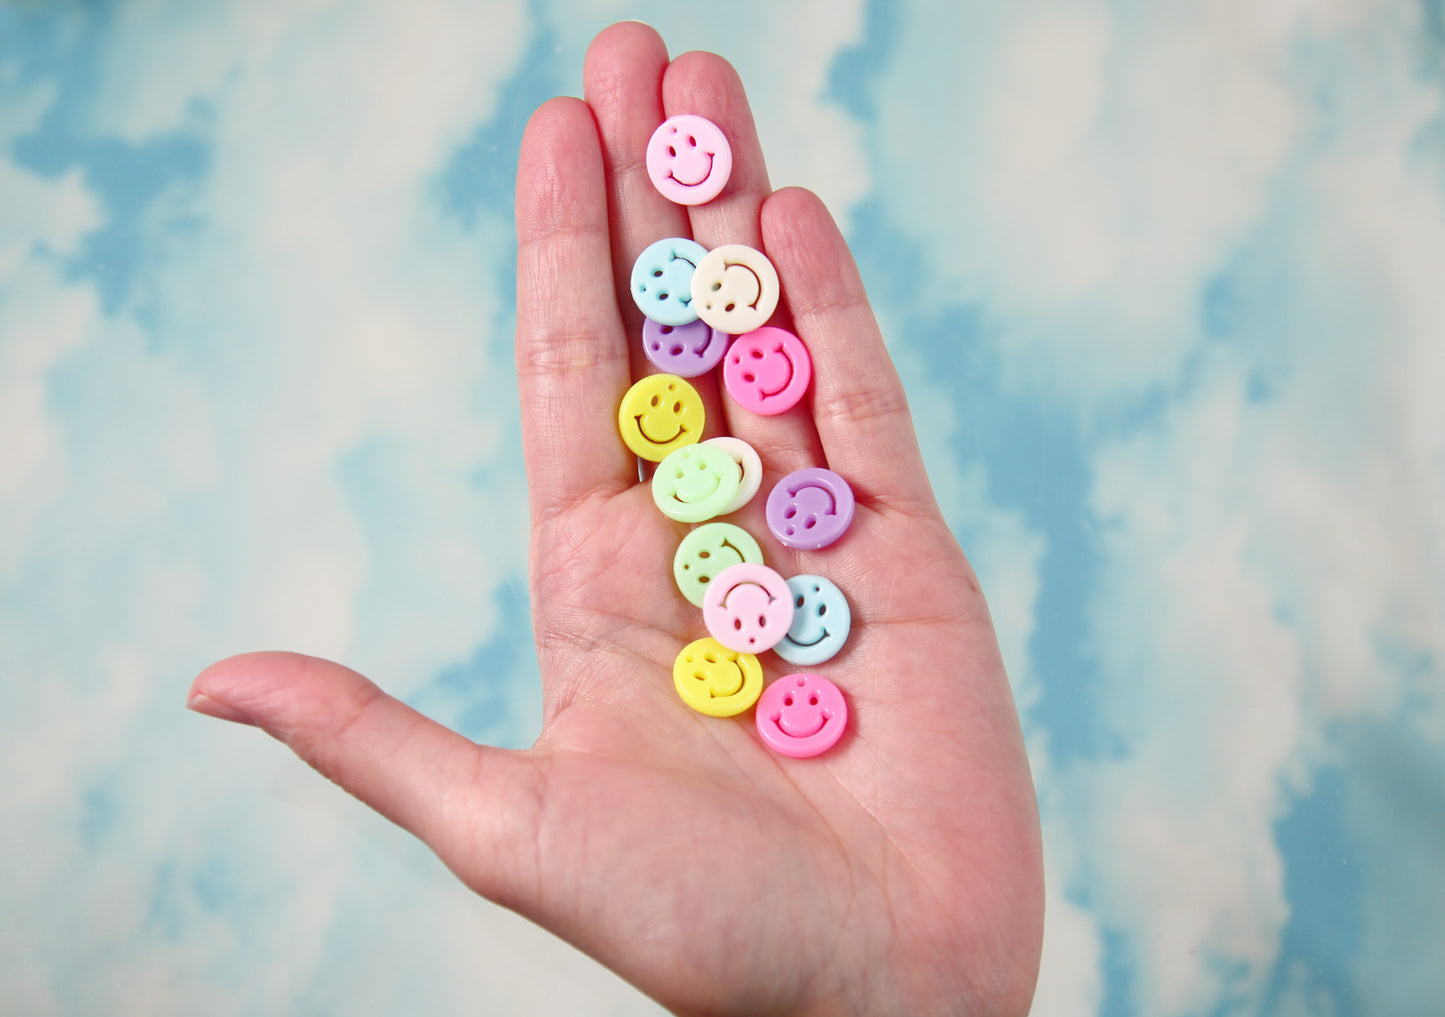 Happy Face Charms - 14mm Pastel Smile Shape Acrylic or Resin Charms or Pendants - 100 pc set